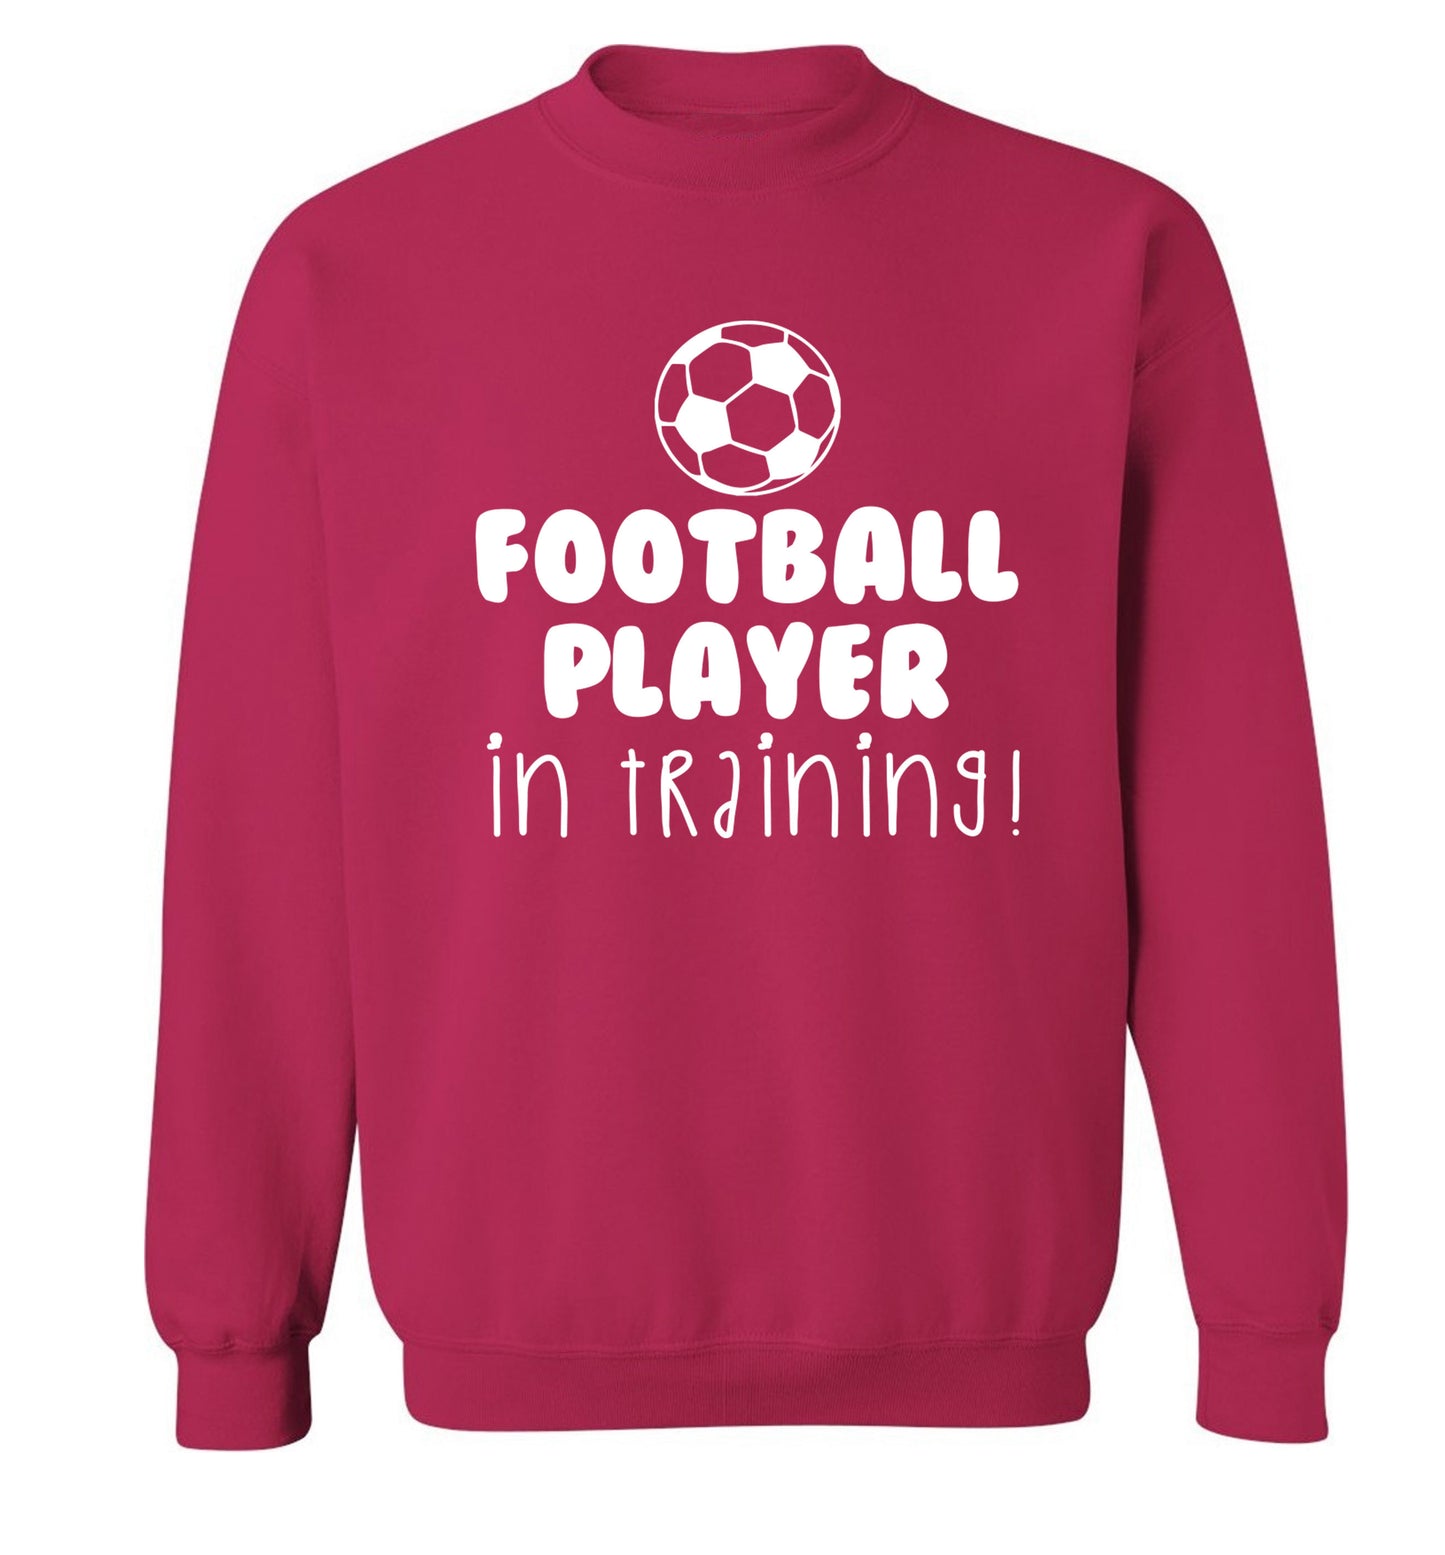 Football player in training Adult's unisex pink Sweater 2XL